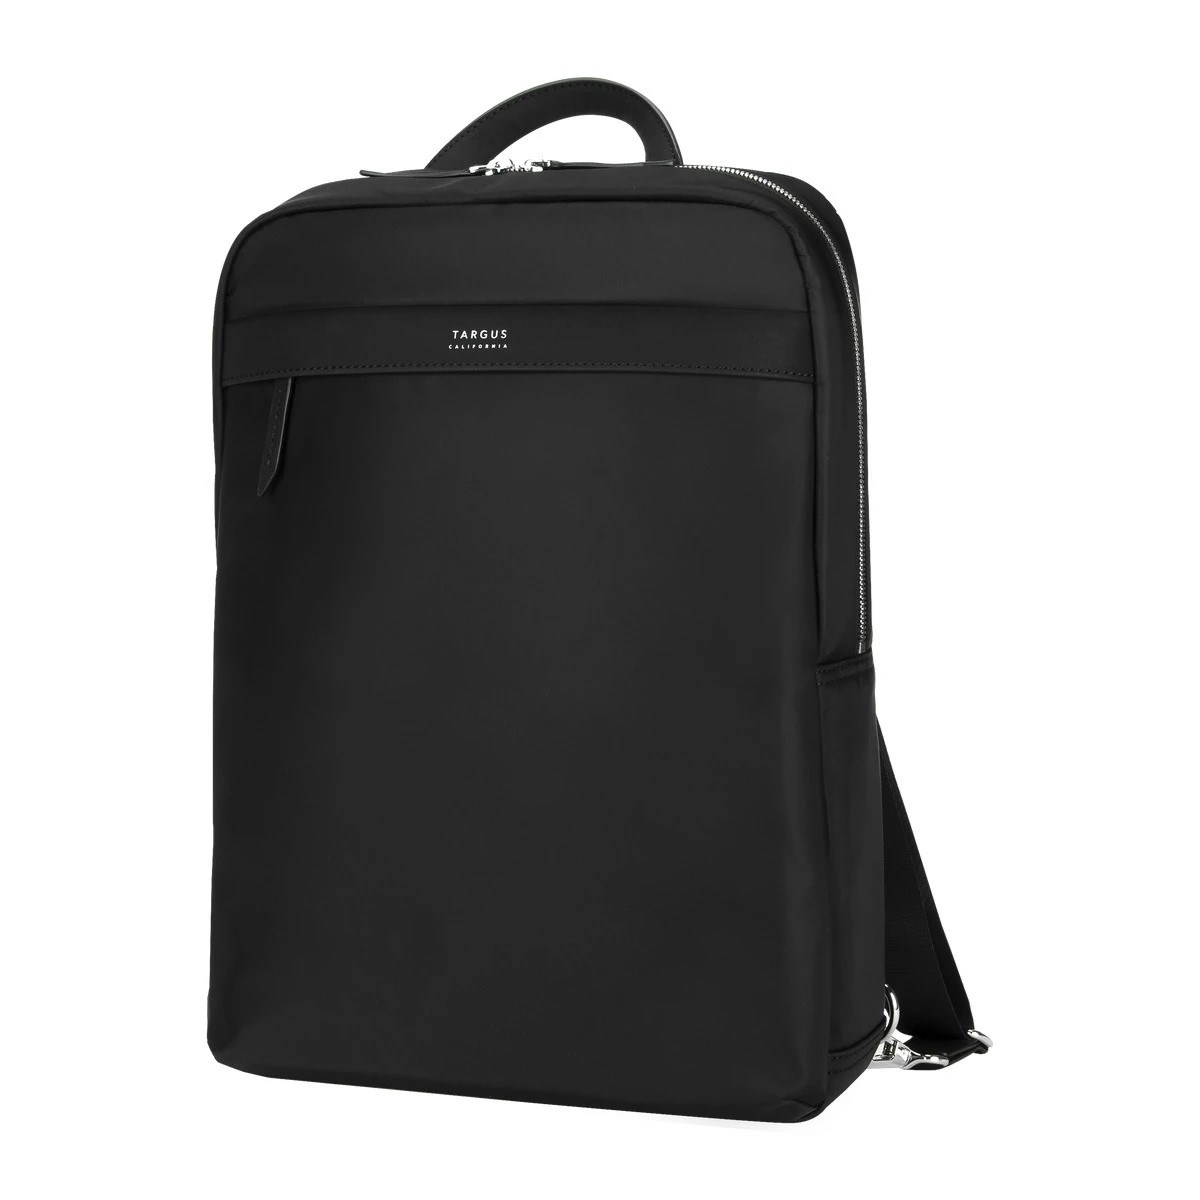 Targus Newport Ultra Slim Backpack Trendy for Travel and Commuter fit up to 15-Inches Laptop TBB598GL Black 